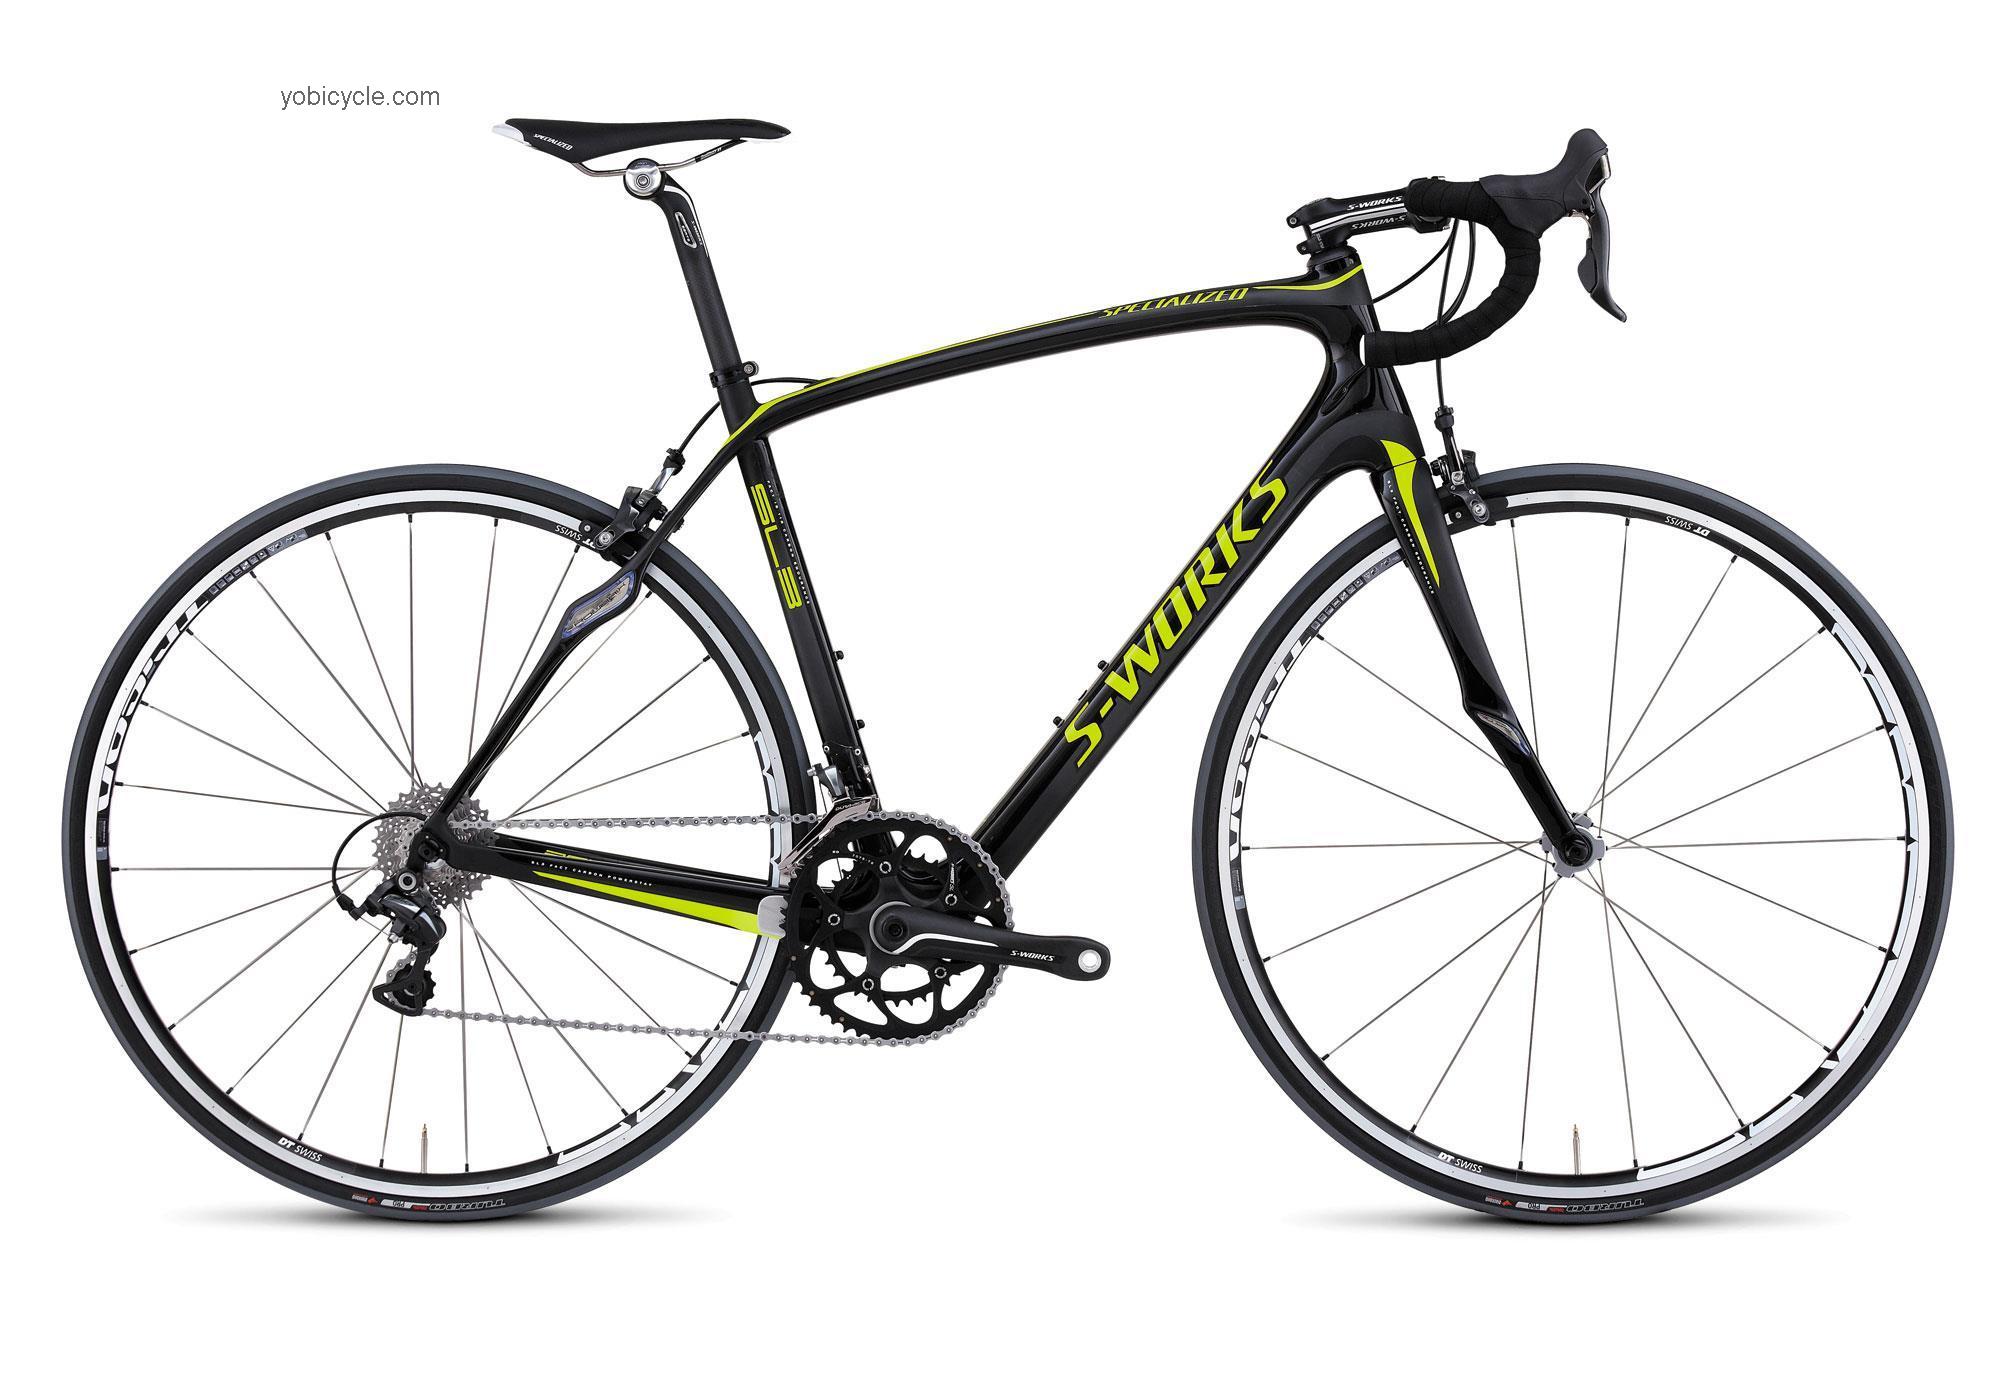 Specialized S-Works Roubaix SL3 Compact Dura-Ace 2012 comparison online with competitors